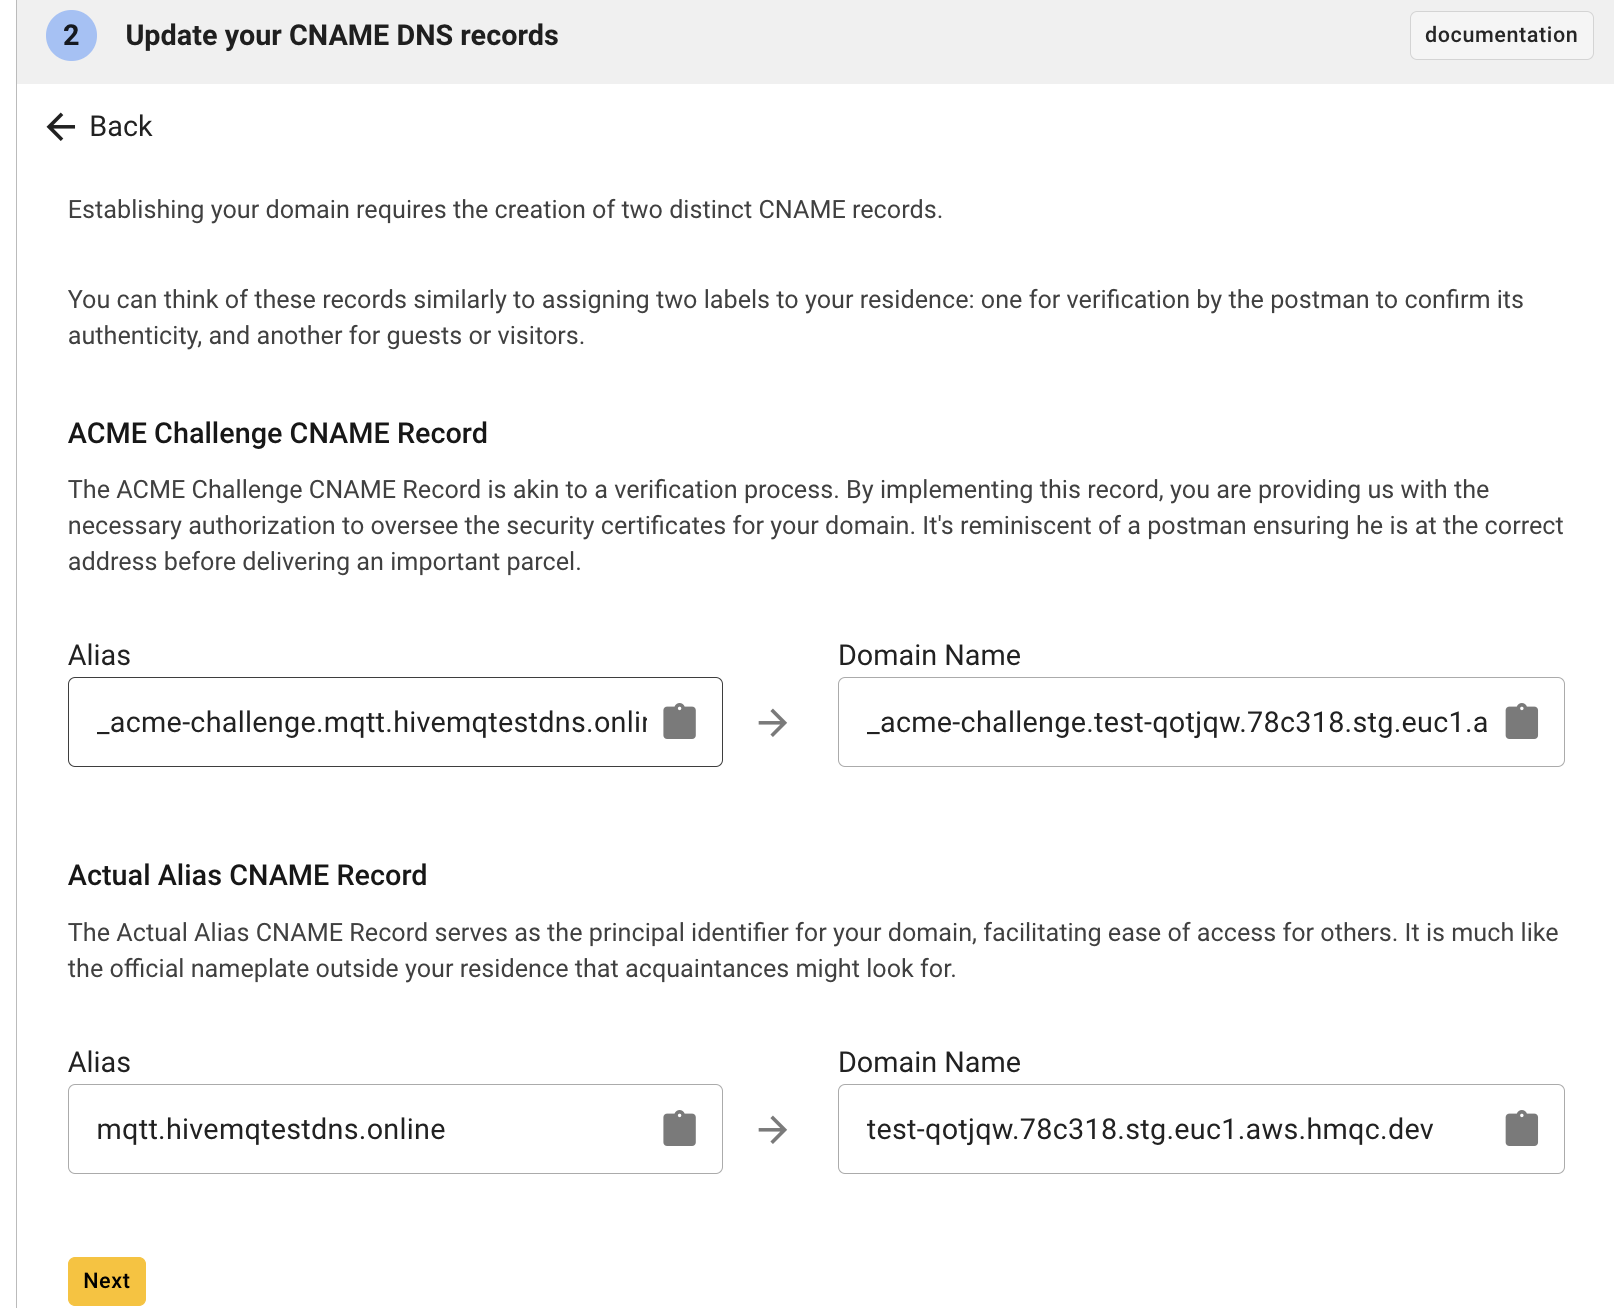 How to Update Your CNAME DNS Records on HiveMQ Cloud Starter?